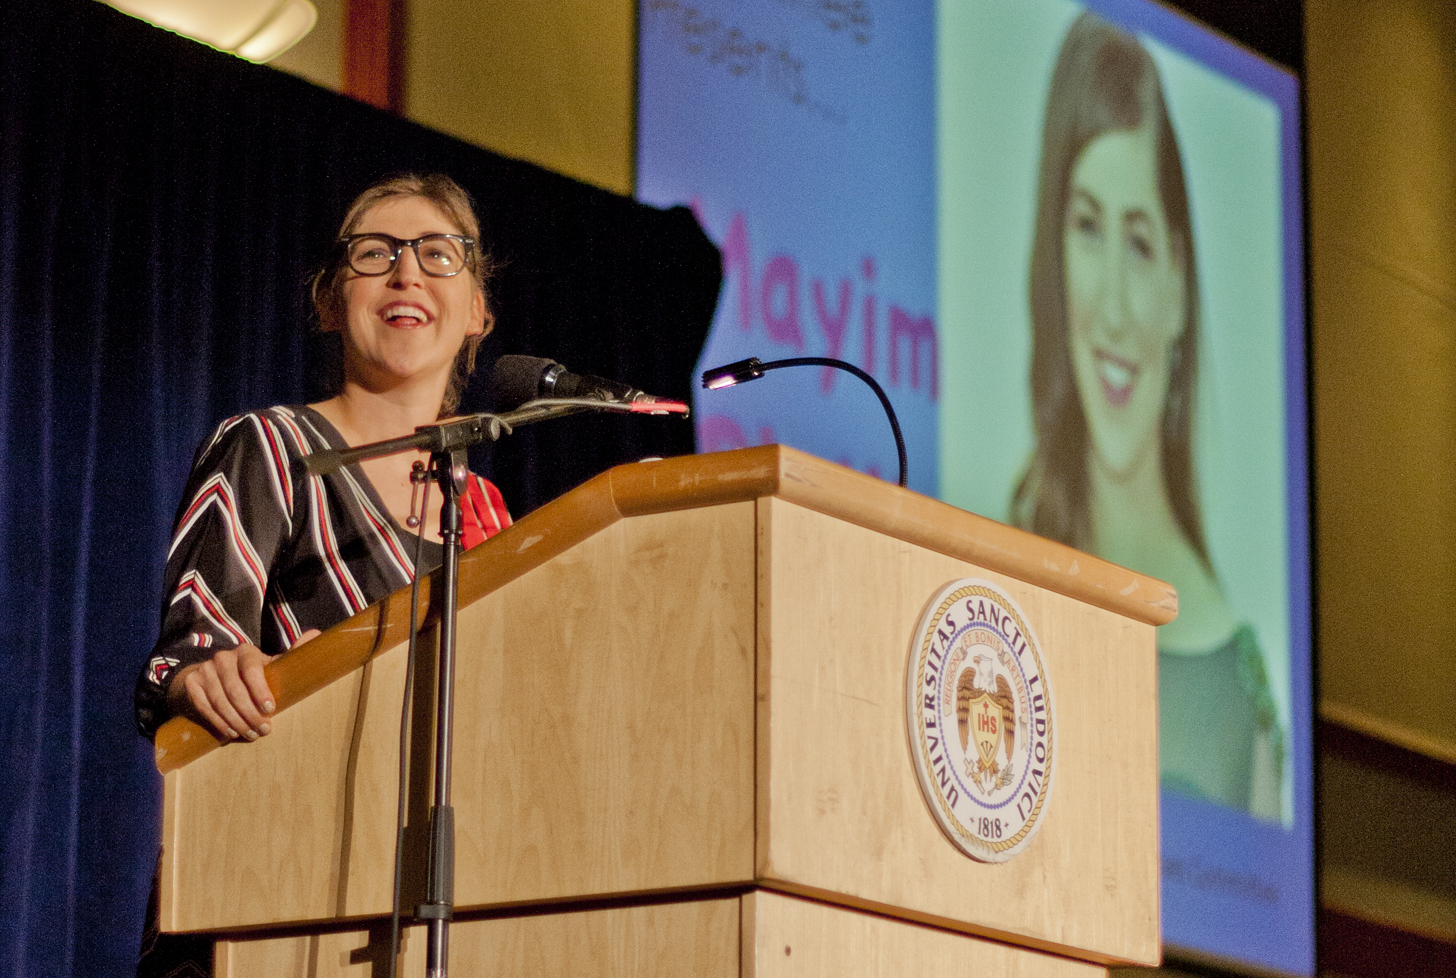 The best of both worlds: Known as Dr. Amy Farrah Fowler on The Big Bang Theory, Bialik elaborated on the parallel worlds of science and acting that define who she is today.

Deirdre Kerins/ The University News